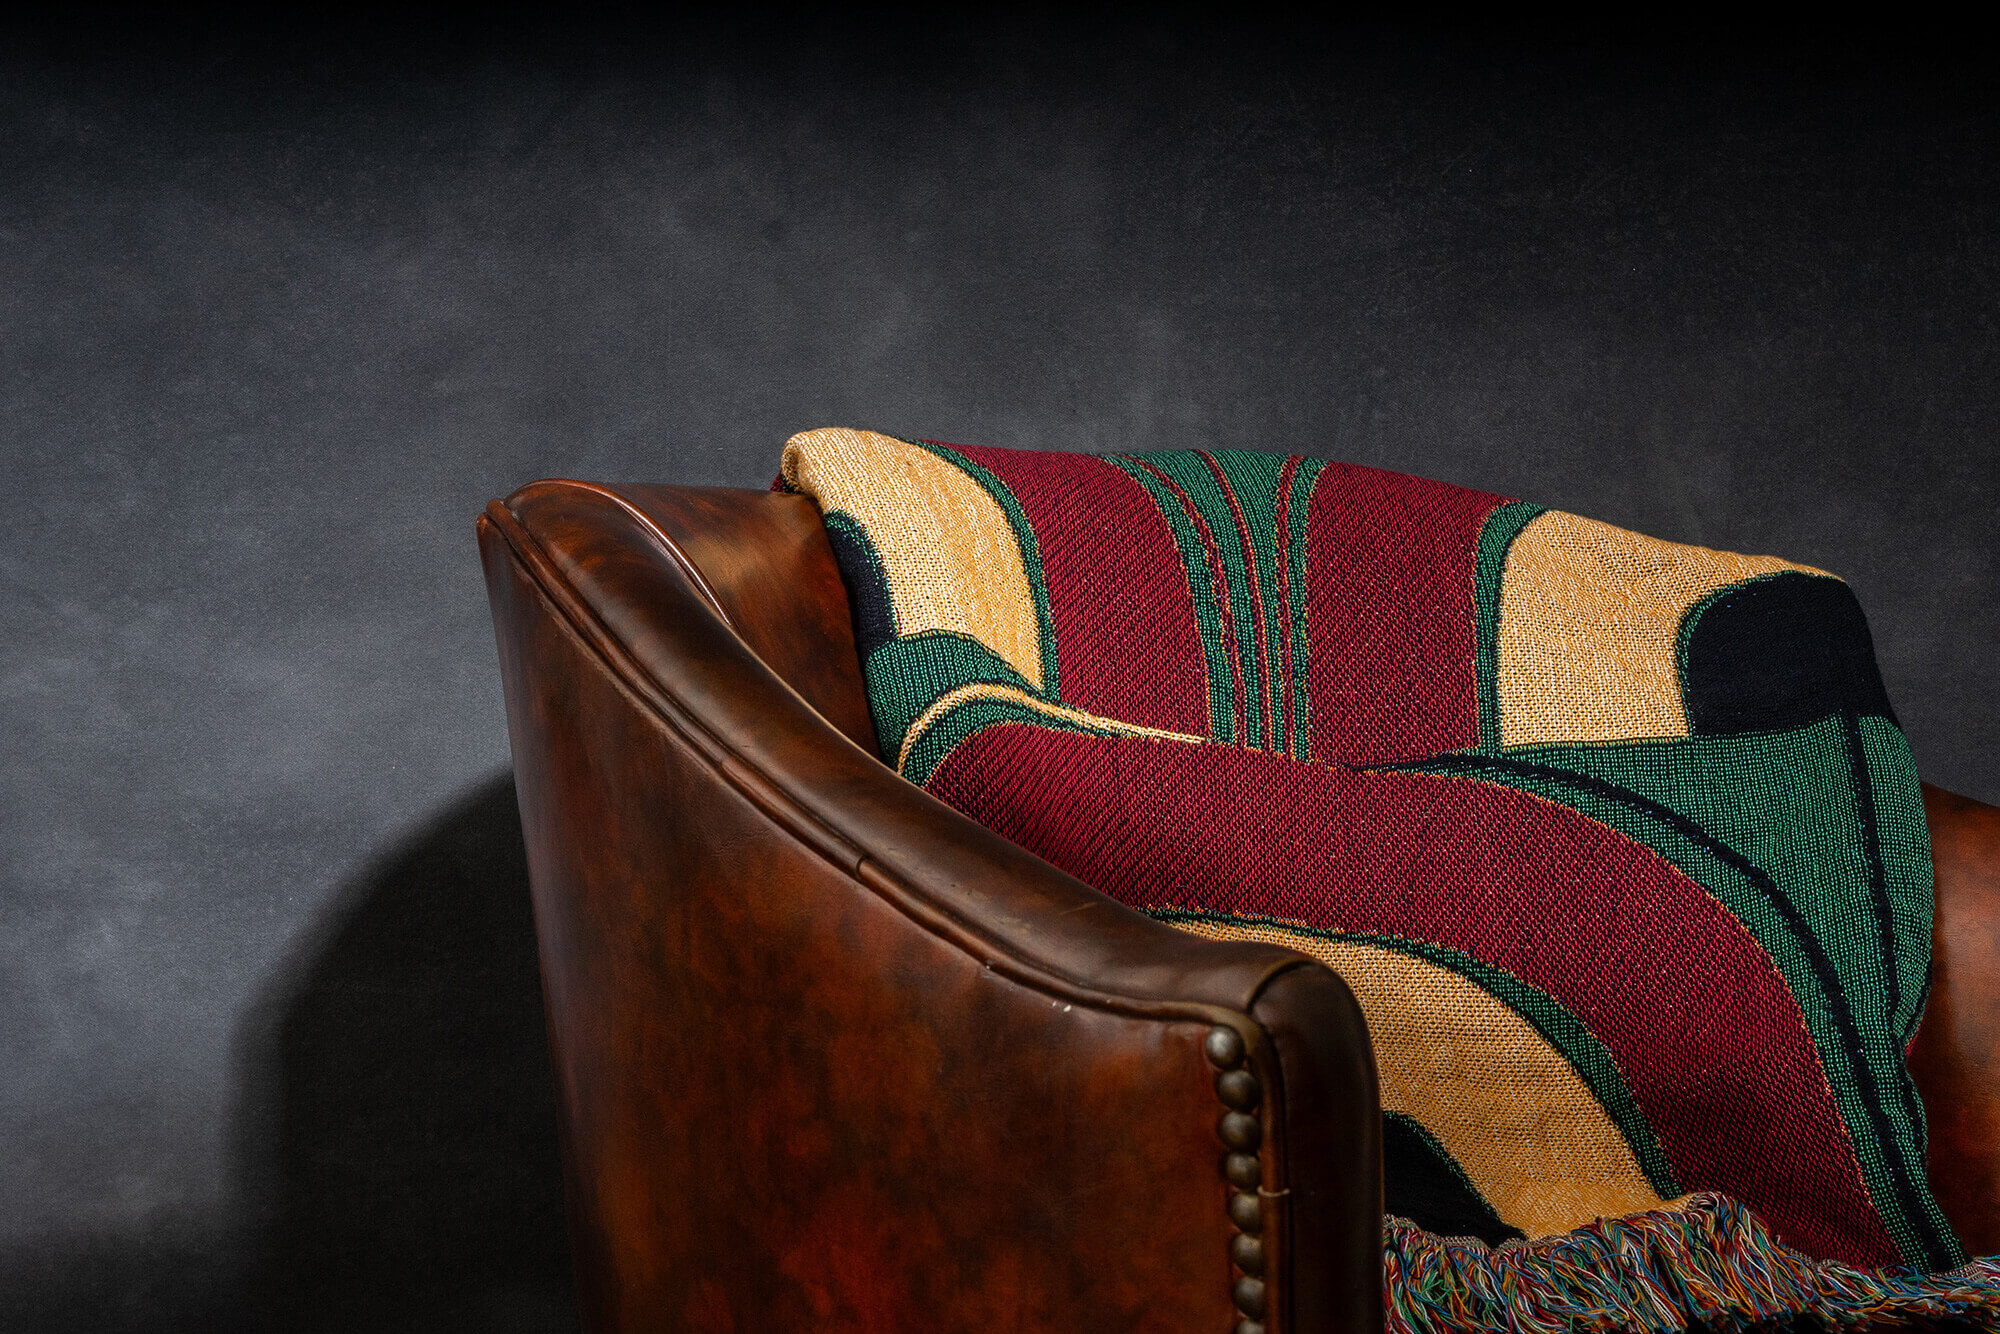 arches blanket on leather chair against cold smokey background